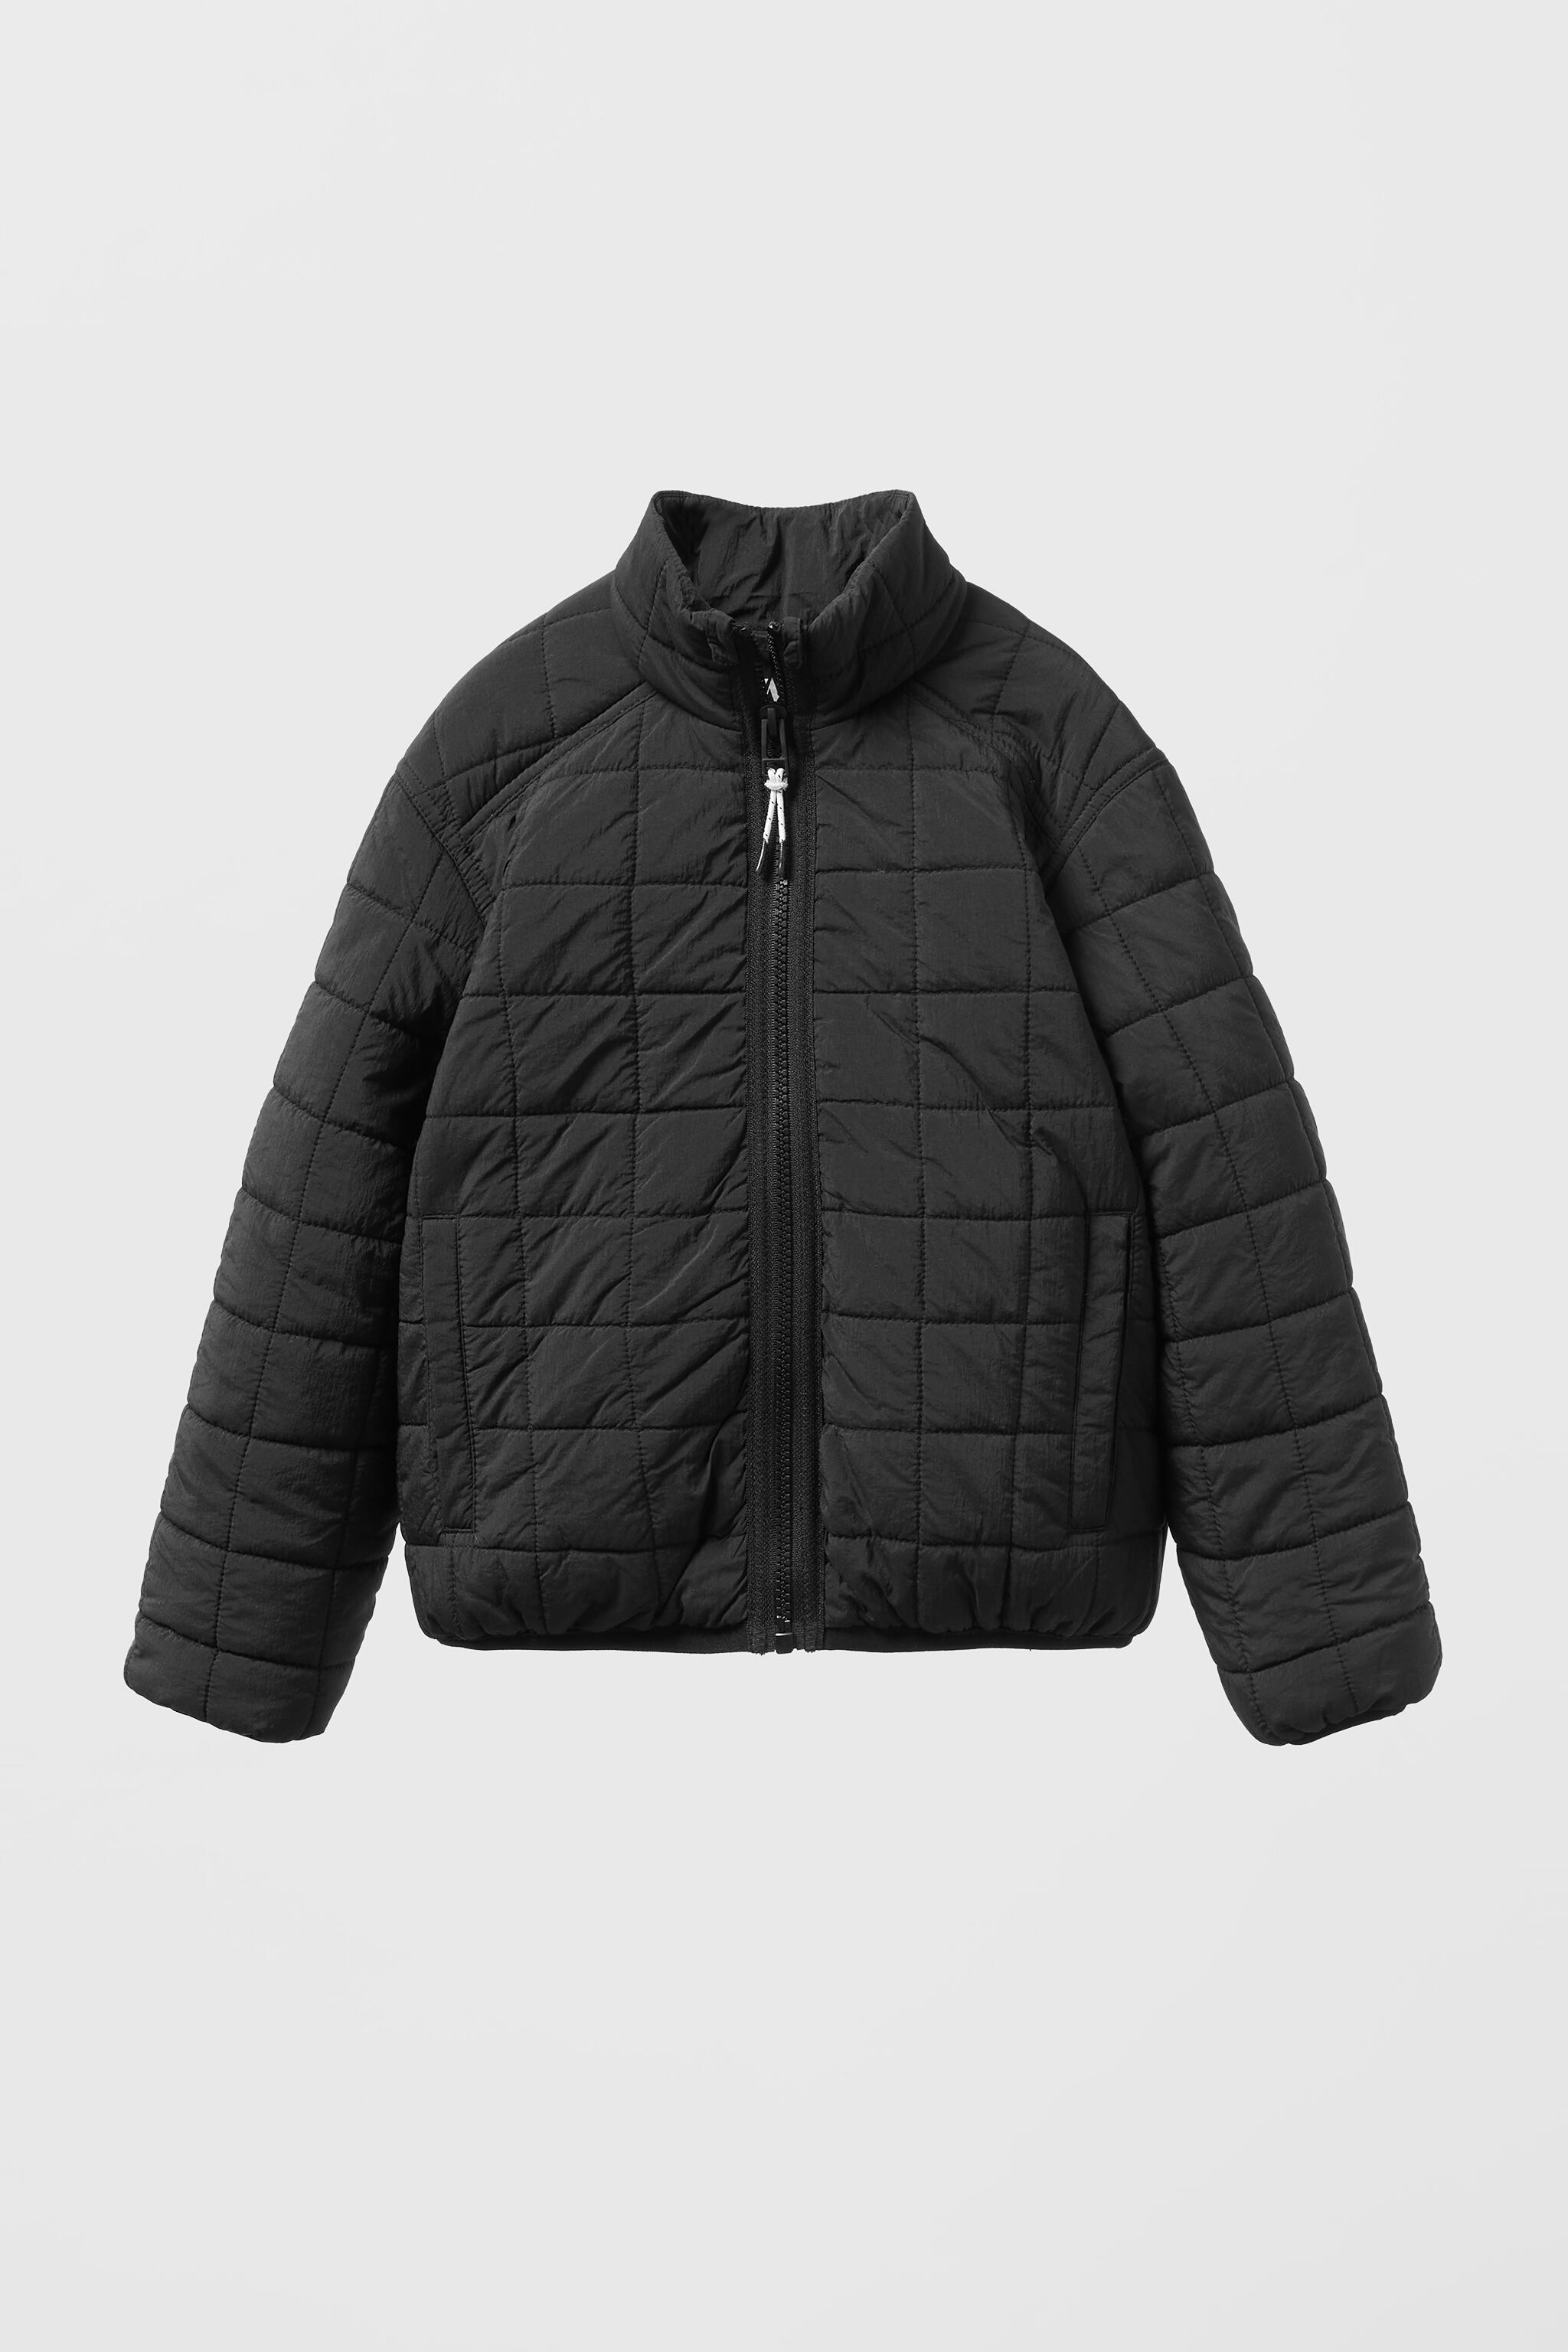 black puffer jacket | Square One